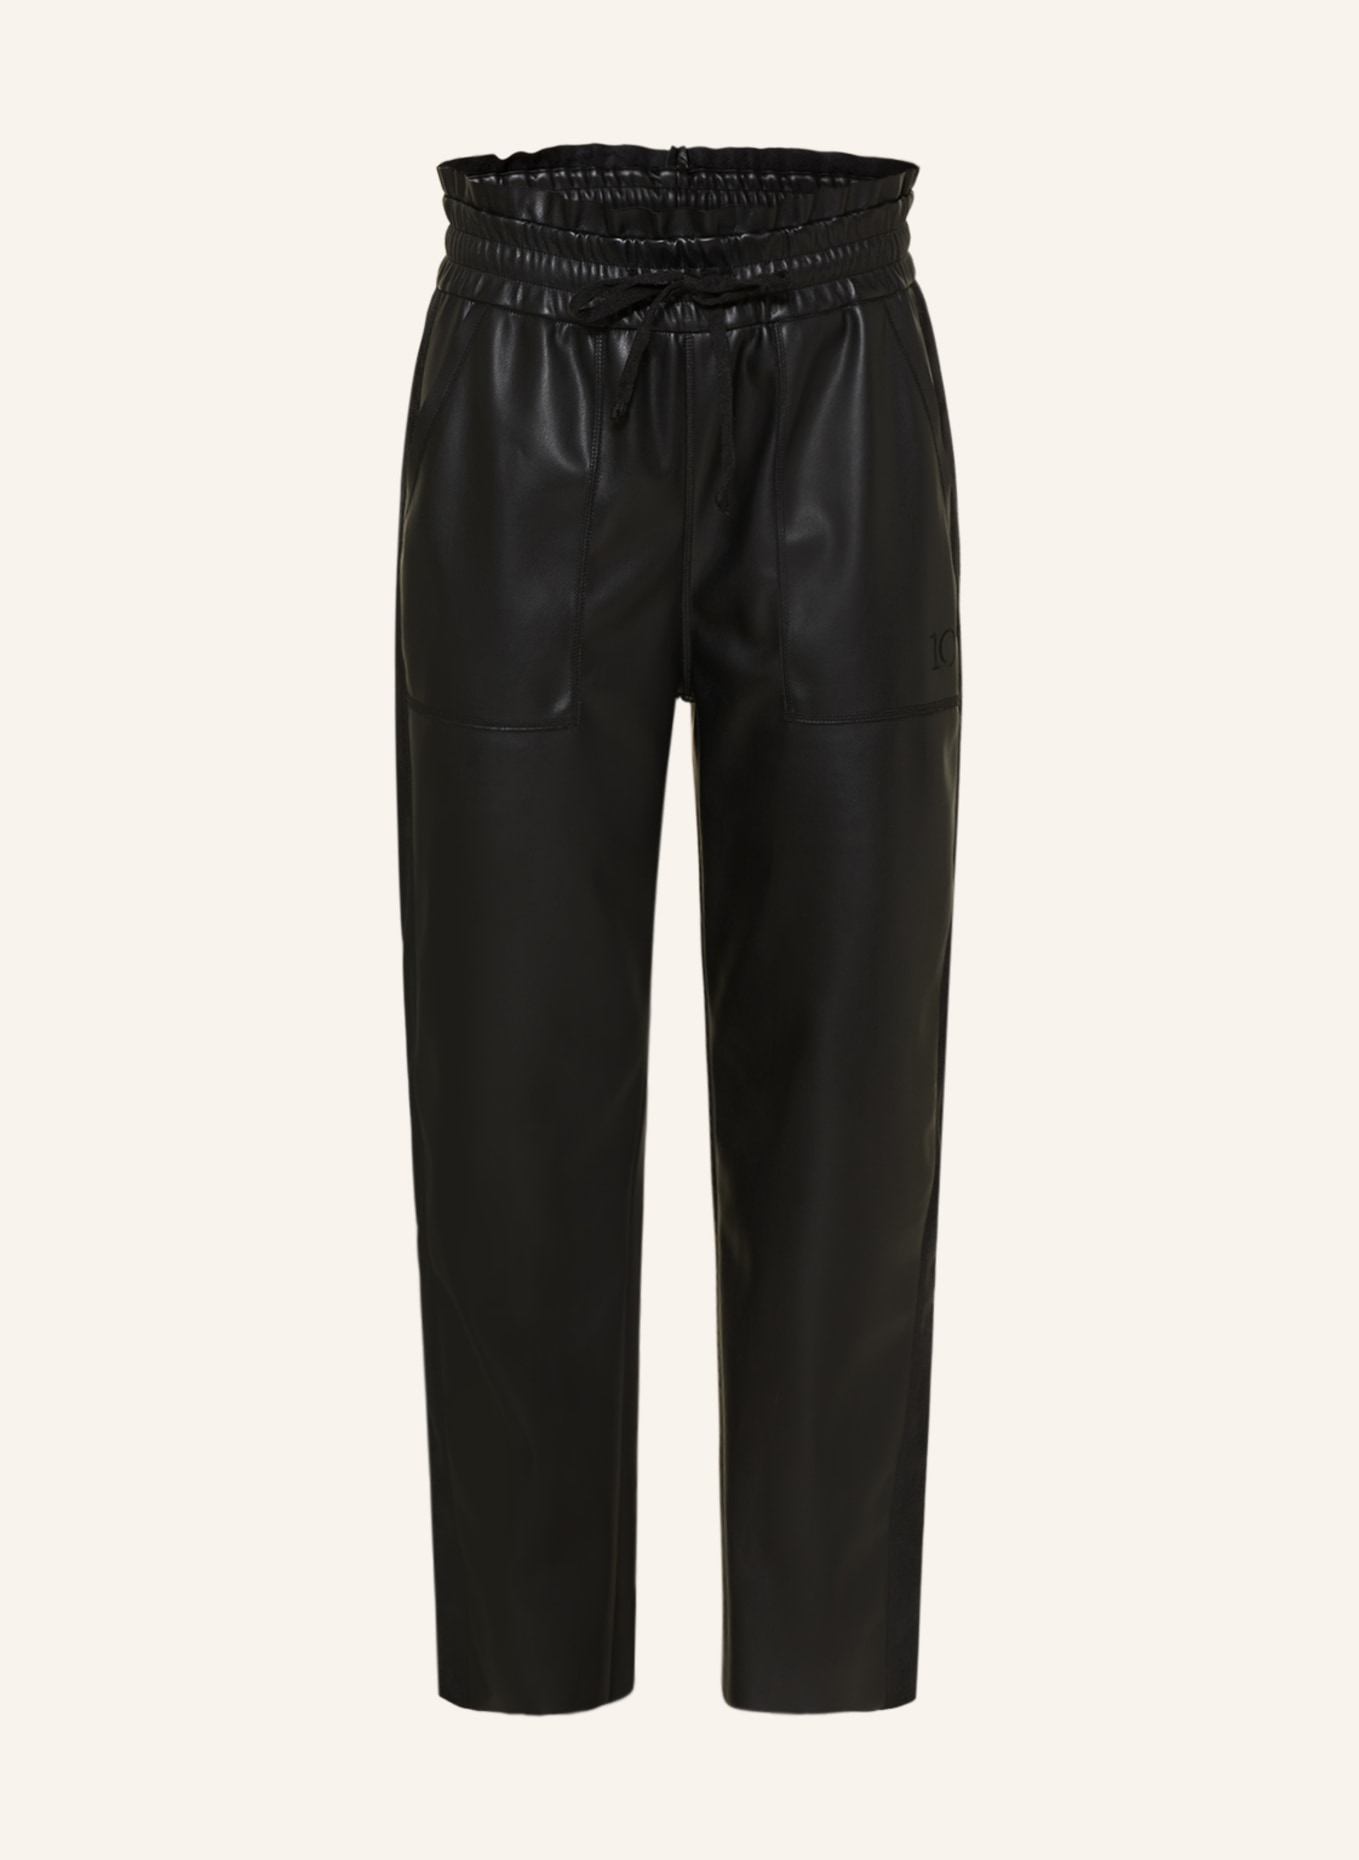 10DAYS Pants in jogger style in leather look, Color: BLACK (Image 1)